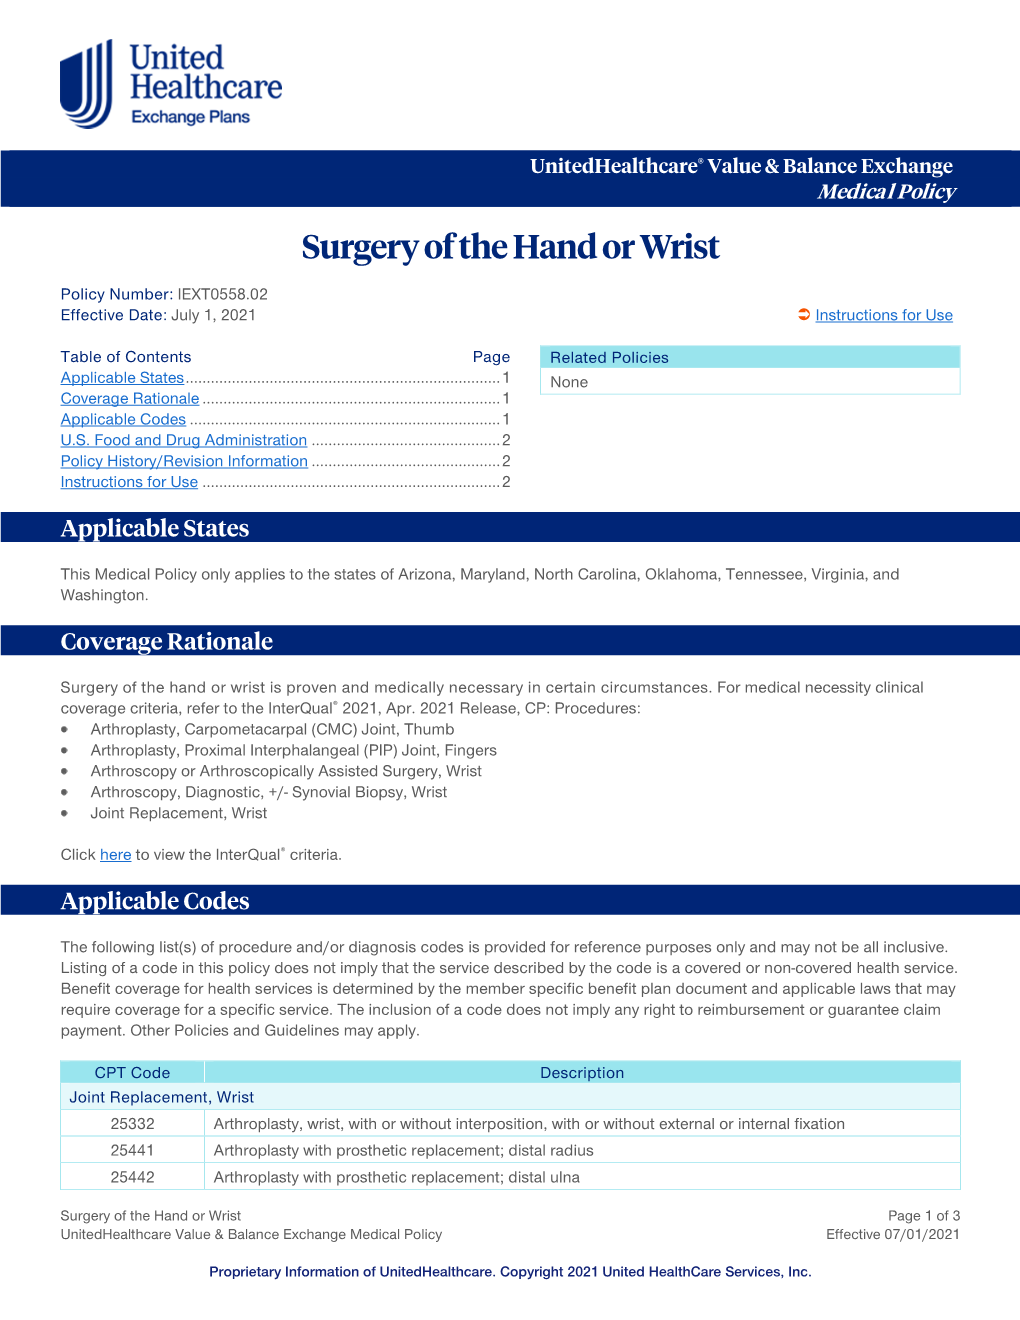 Surgery of the Hand Or Wrist – Value & Balance Exchange Medical Policy